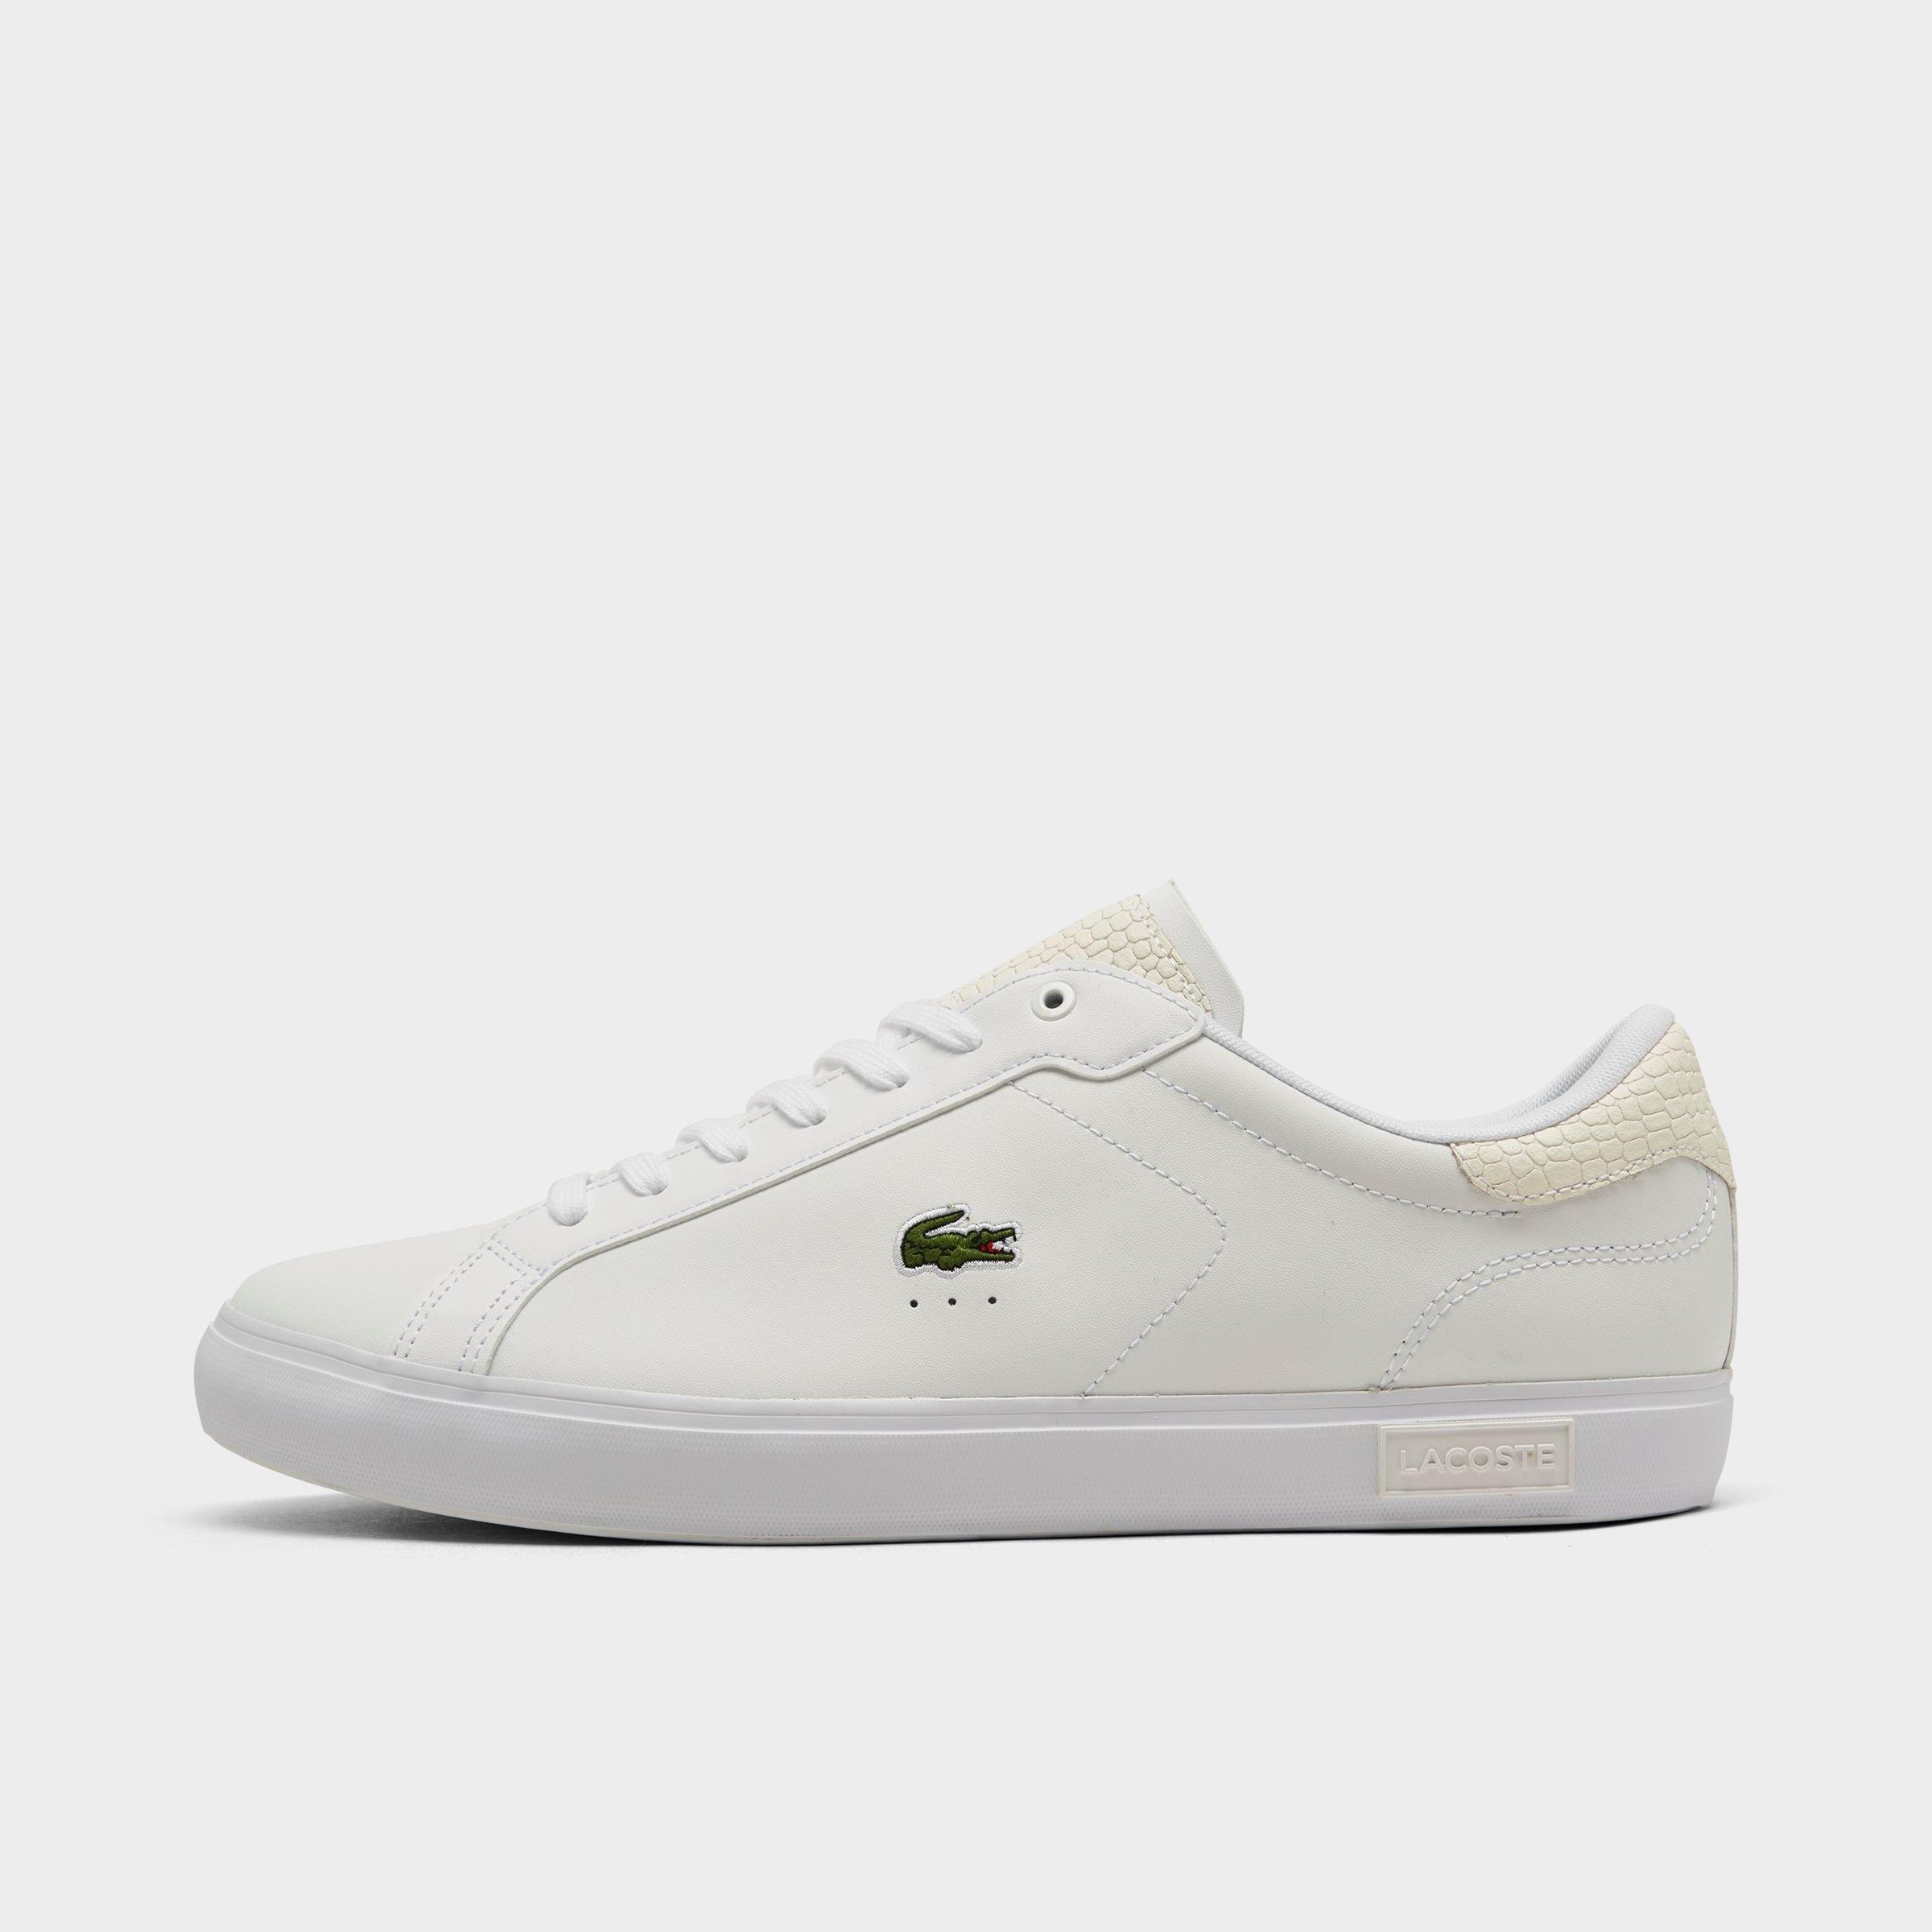 Lacoste Shoes, Apparel & for Women | Finish Line